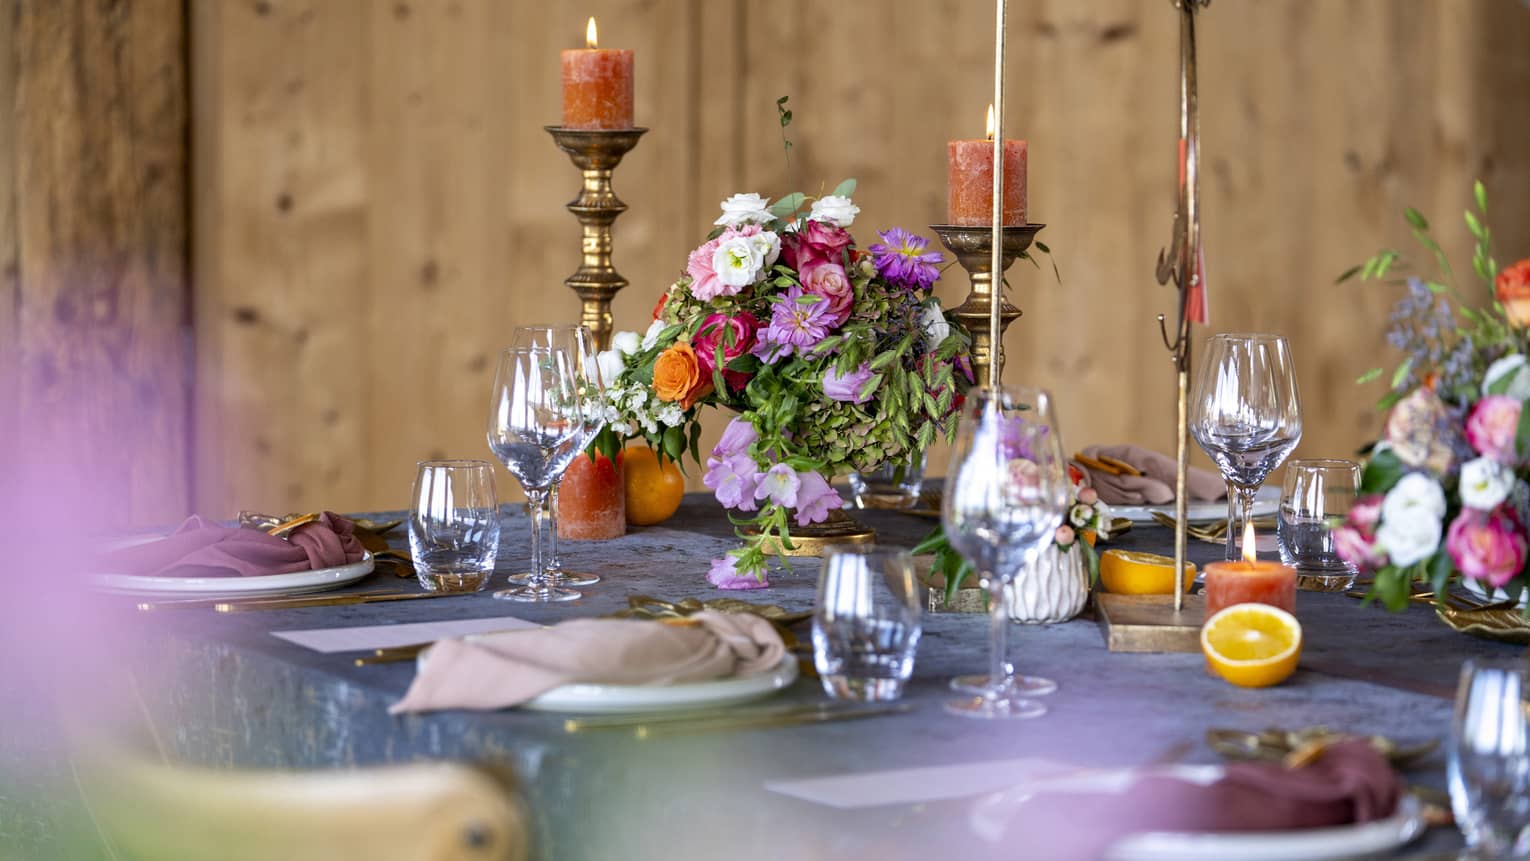 Wedding table setting with assorted flowers and burnished accents